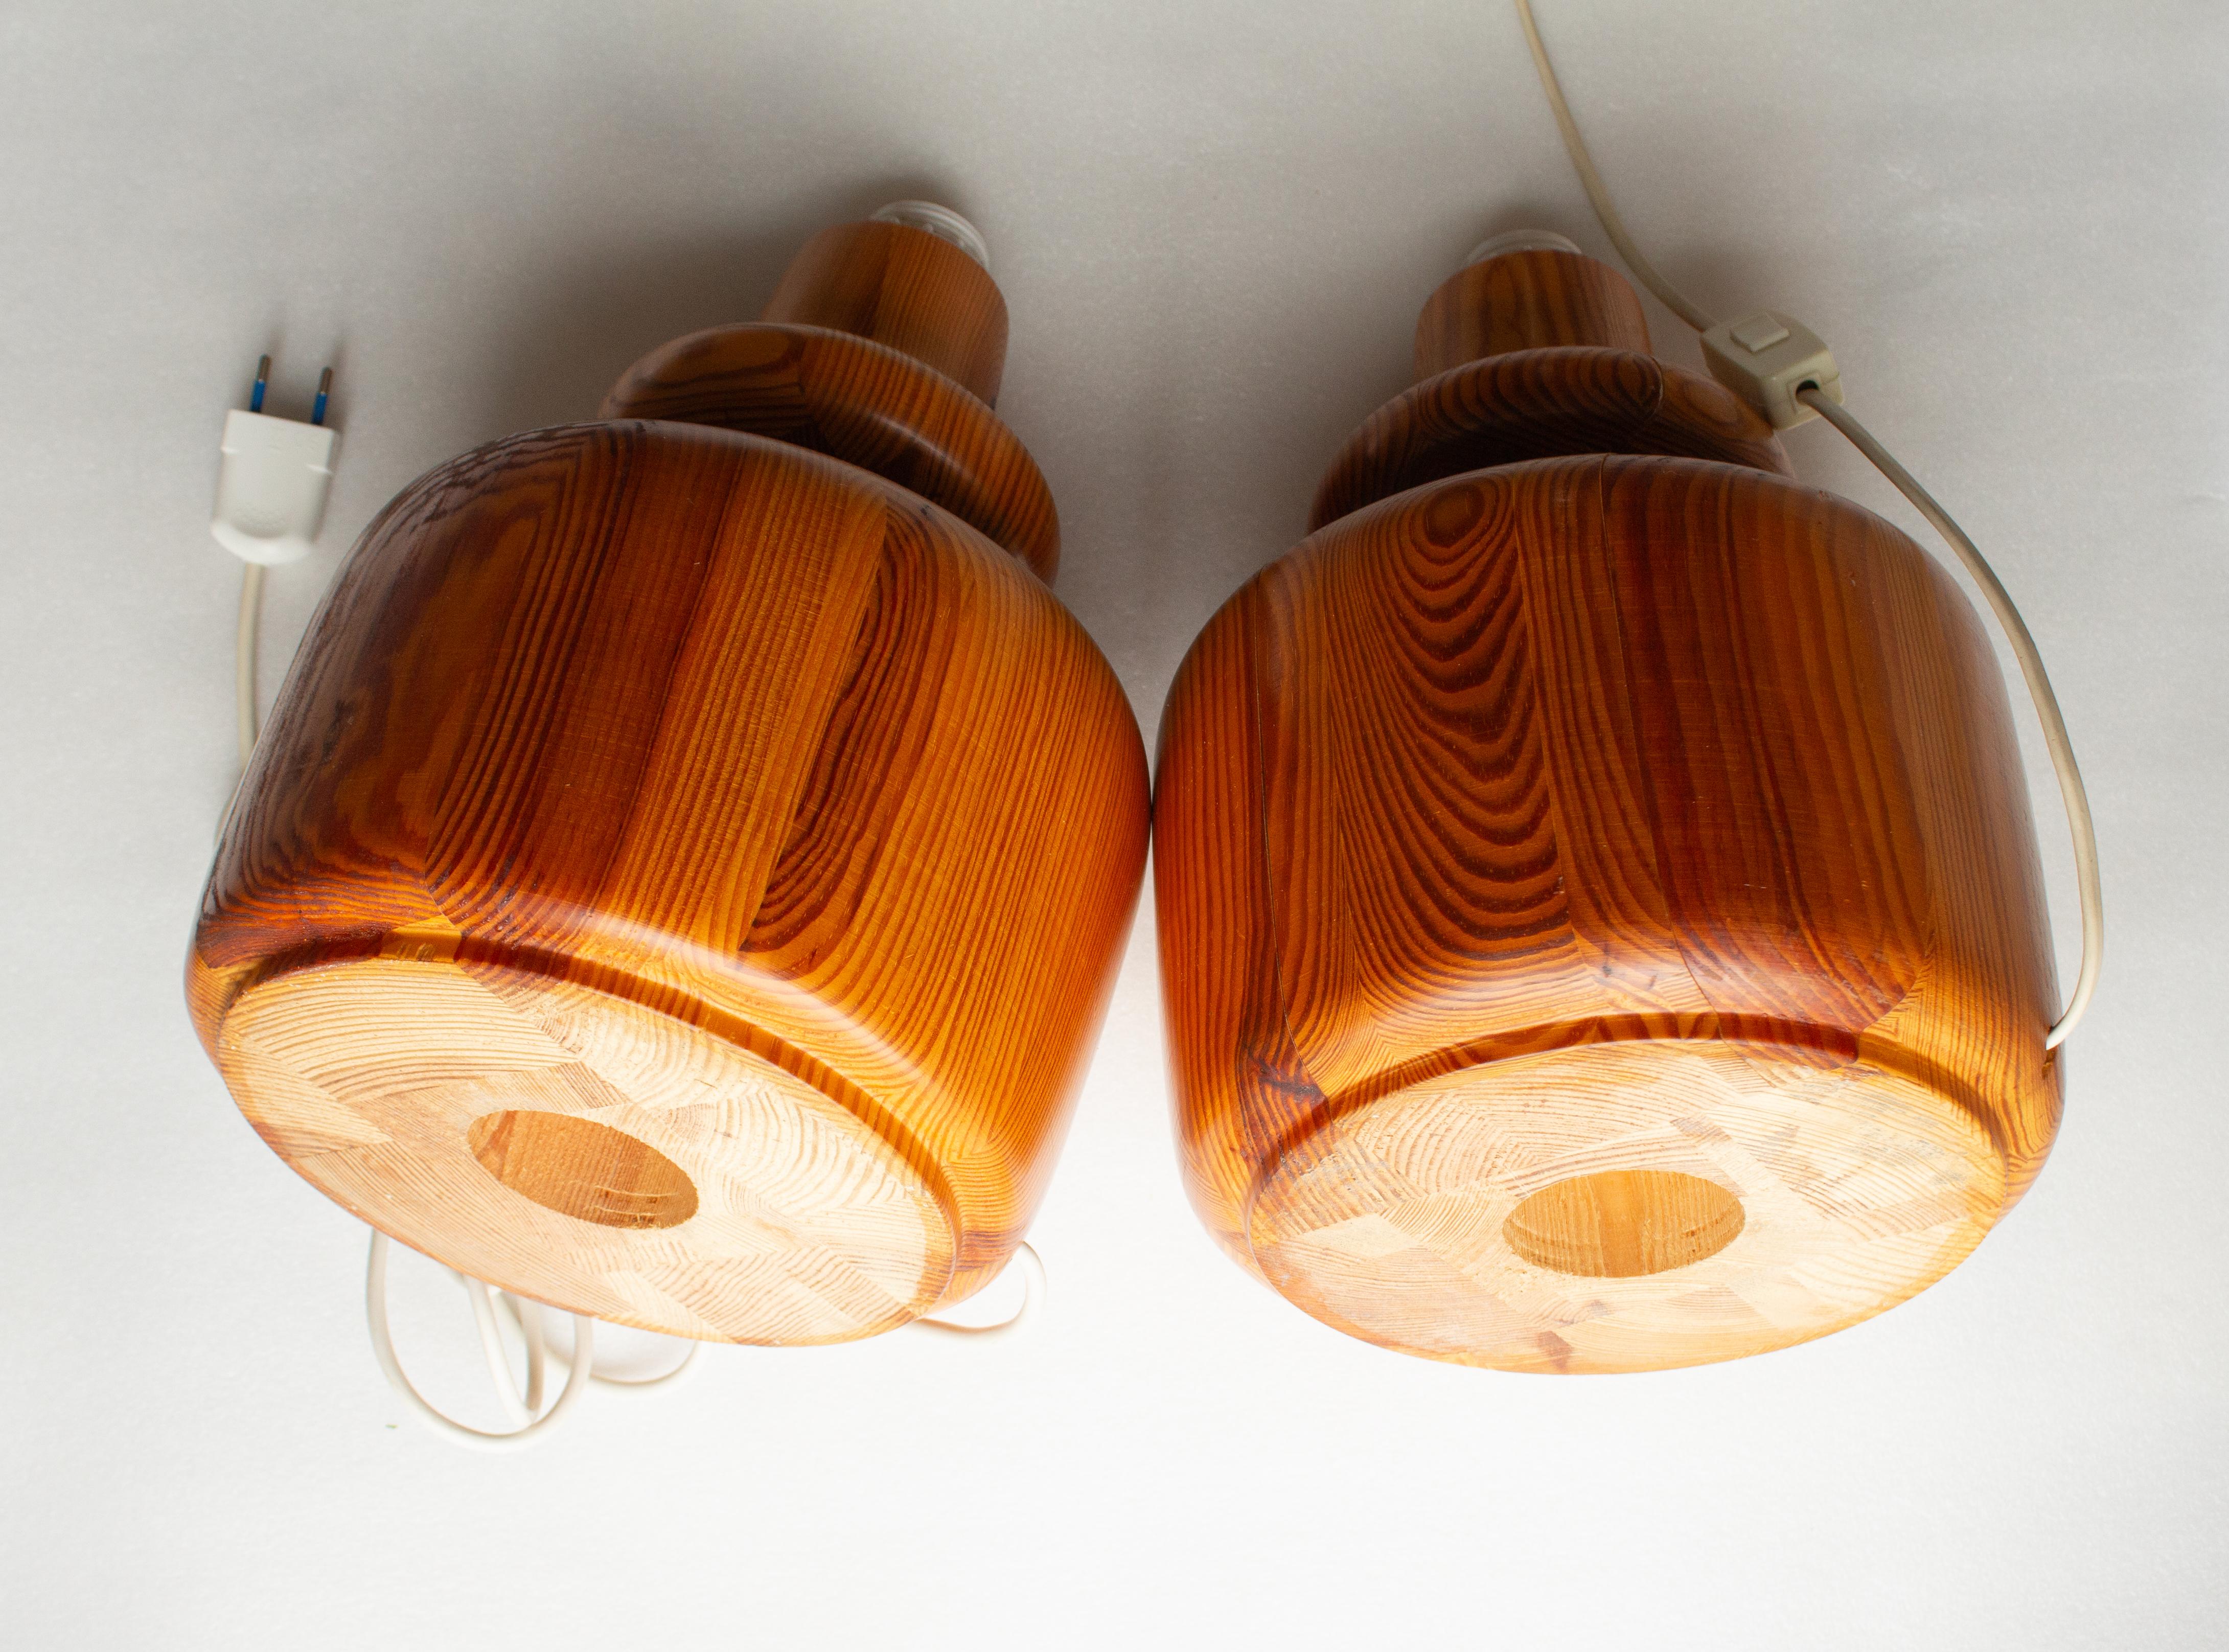 A Pair of Table Lamps in Solid Pine from Sweden, 1970s For Sale 2